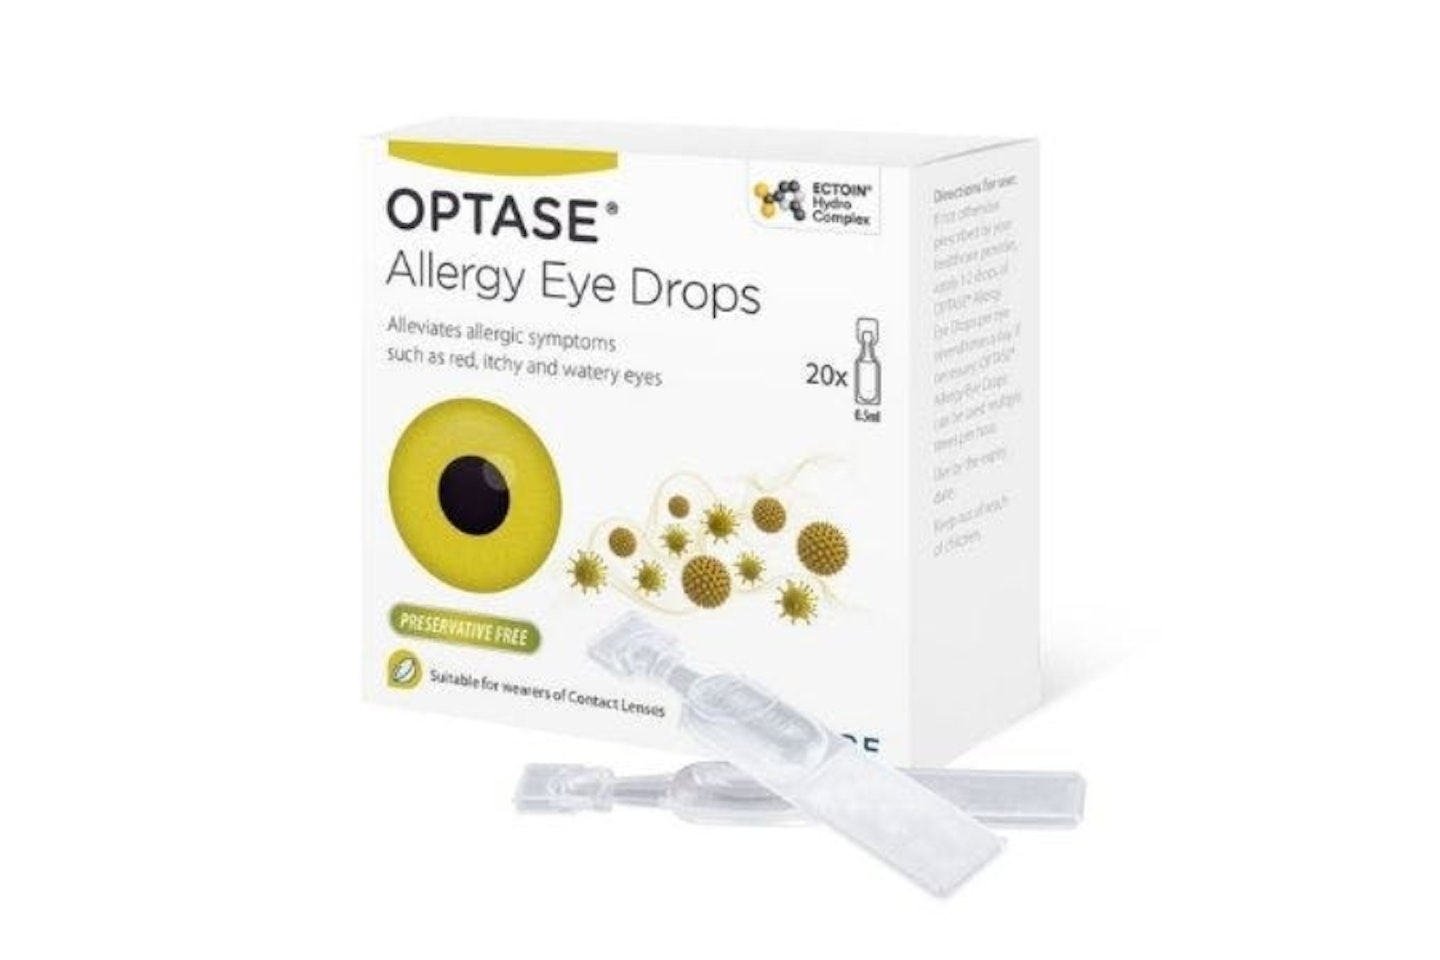 OPTASE Allergy Eye Drops 20 x 0.5ml - one of the best hay fever eye drops